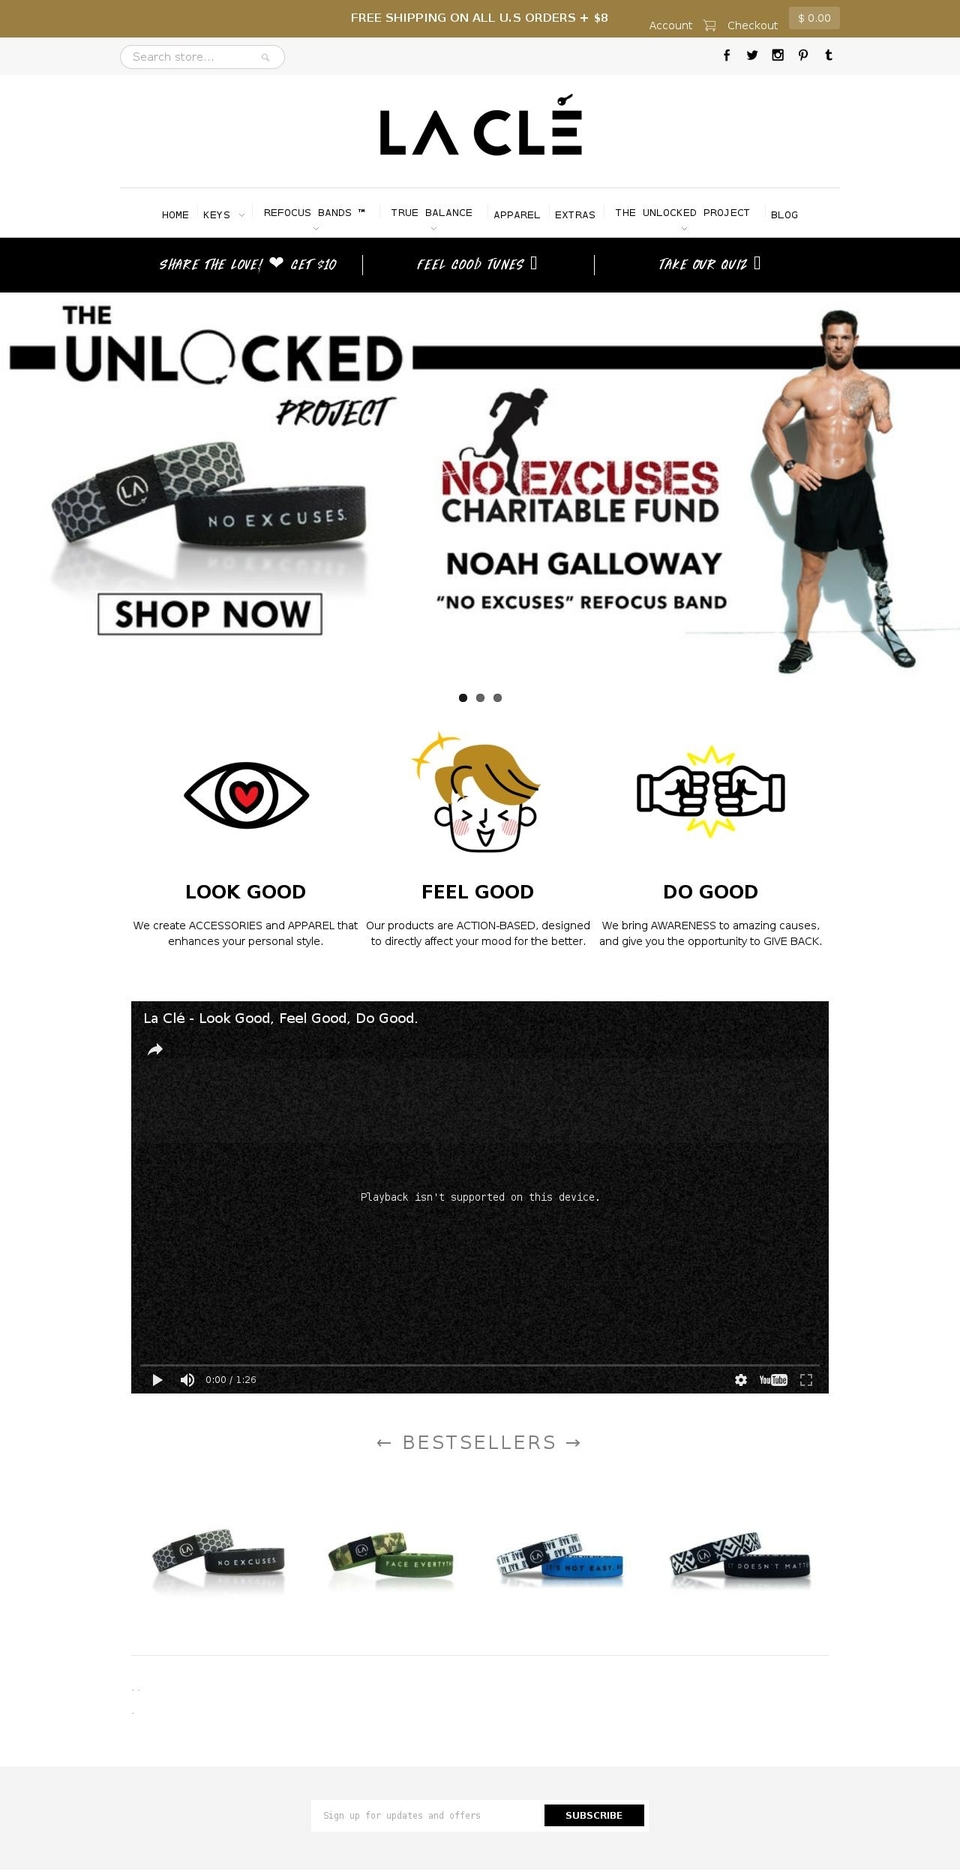 Wholesale Shopify theme site example shoplacle.com